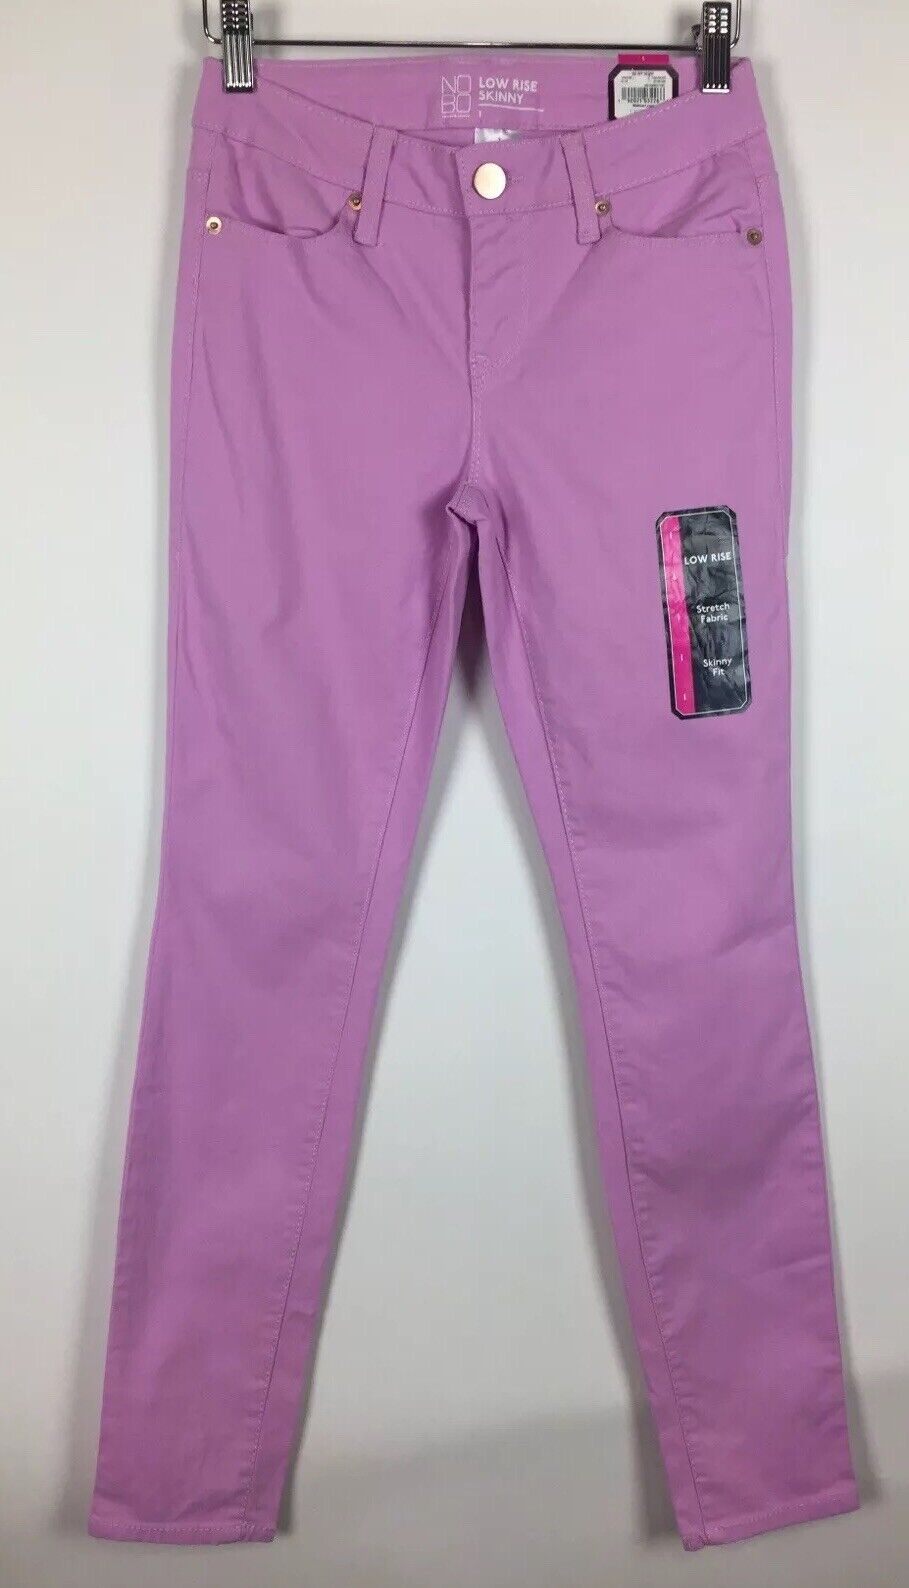 No Boundaries Junior's Pink Orchid Low Rise Skinny Fit Jeans Size 7 OR 15